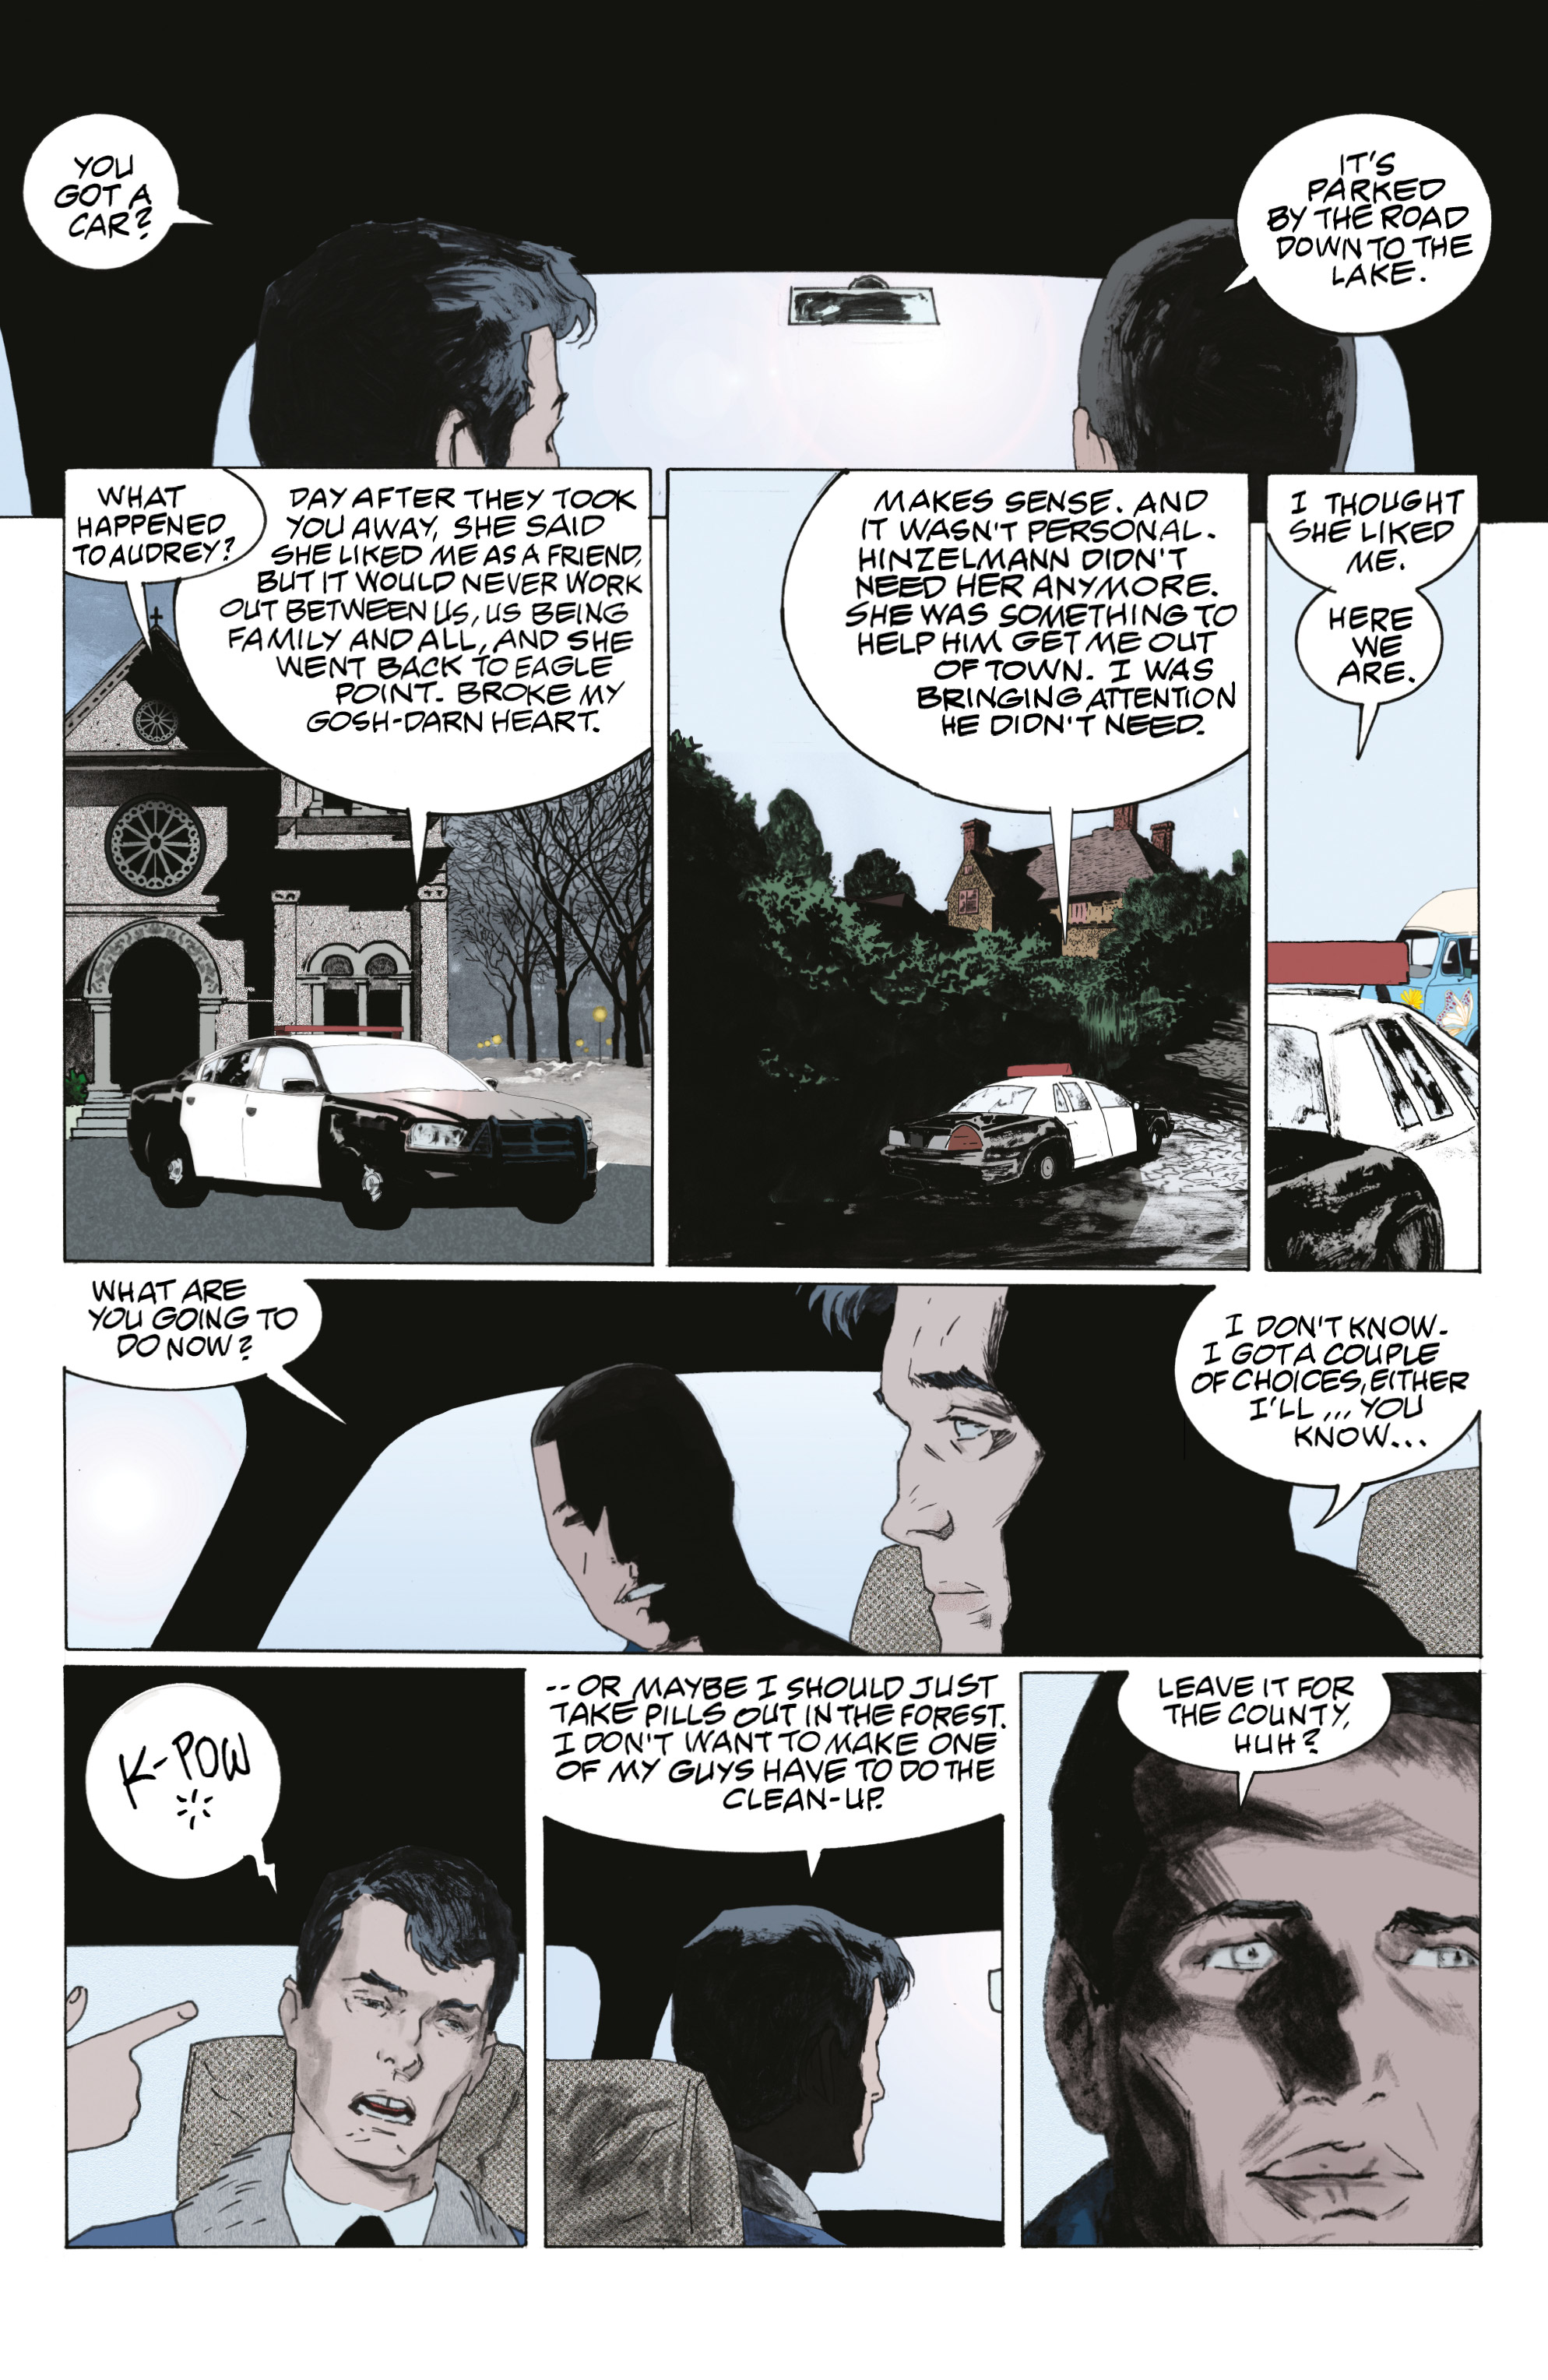 American Gods: The Moment of the Storm (2019): Chapter 9 - Page 3